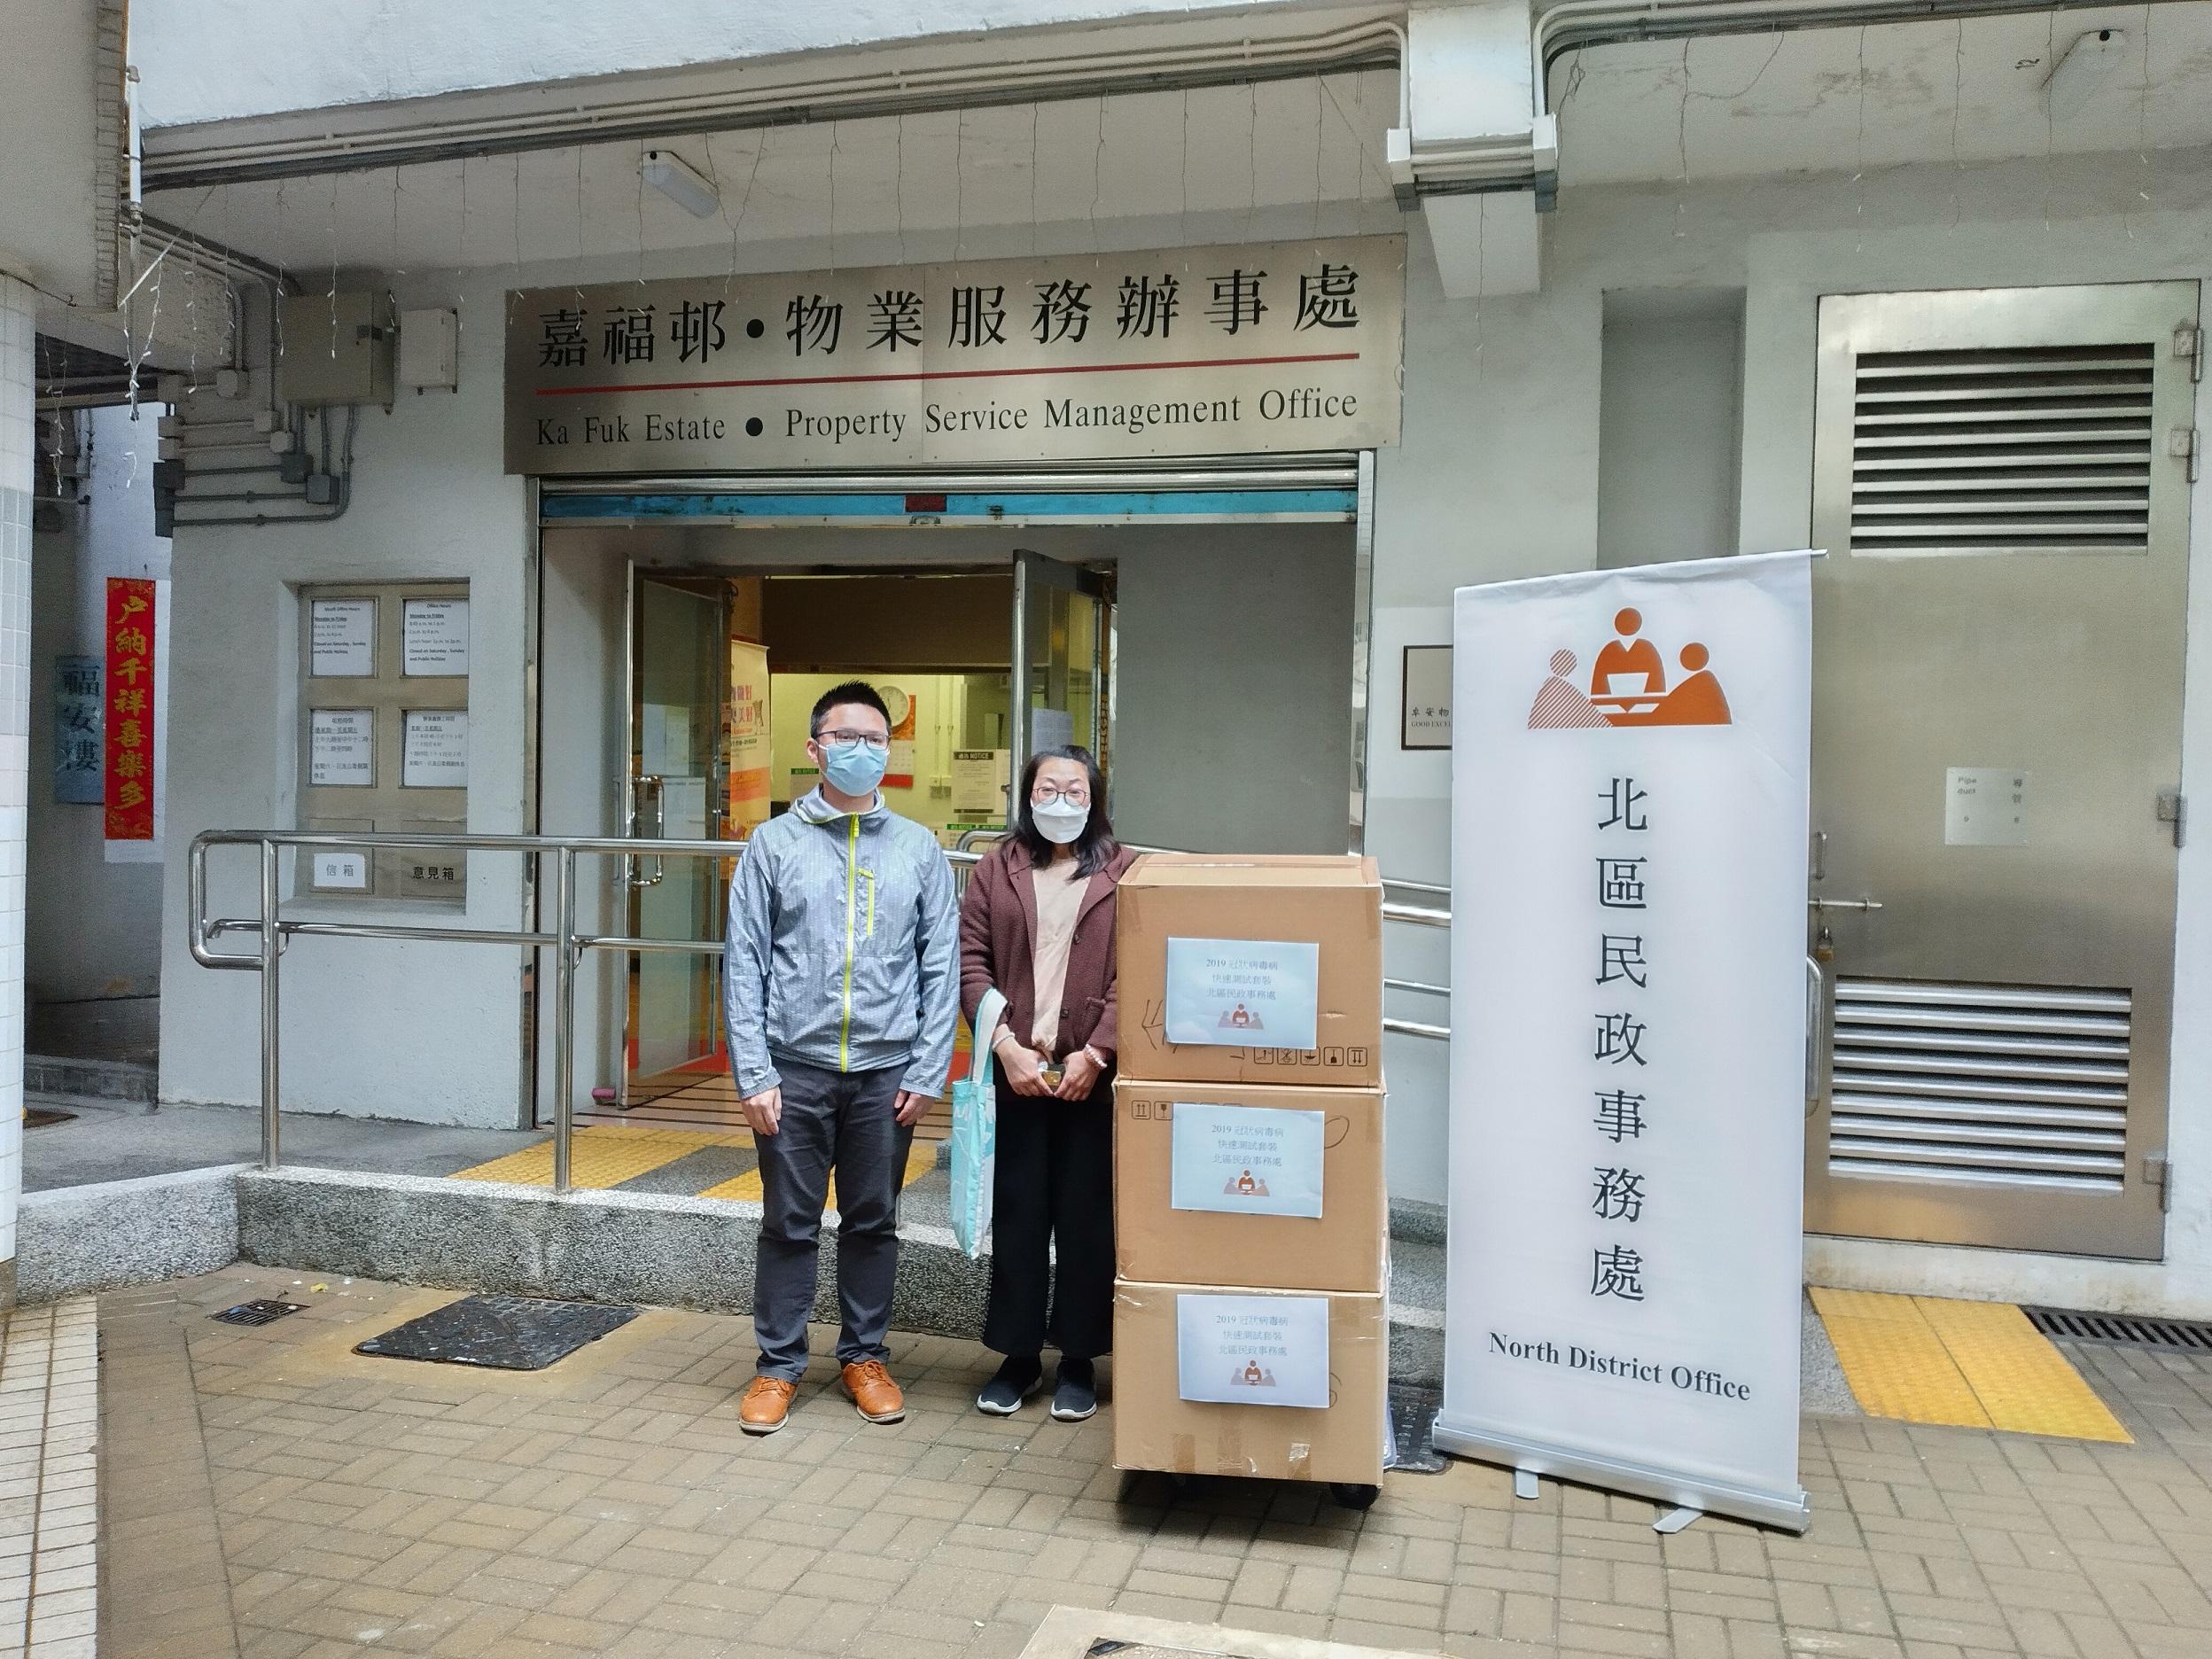 The North District Office today (March 1) distributed COVID-19 rapid test kits to households, cleansing workers and property management staff living and working in Ka Fuk Estate, Fanling for voluntary testing through the Property Service Management Office of the Housing Department.